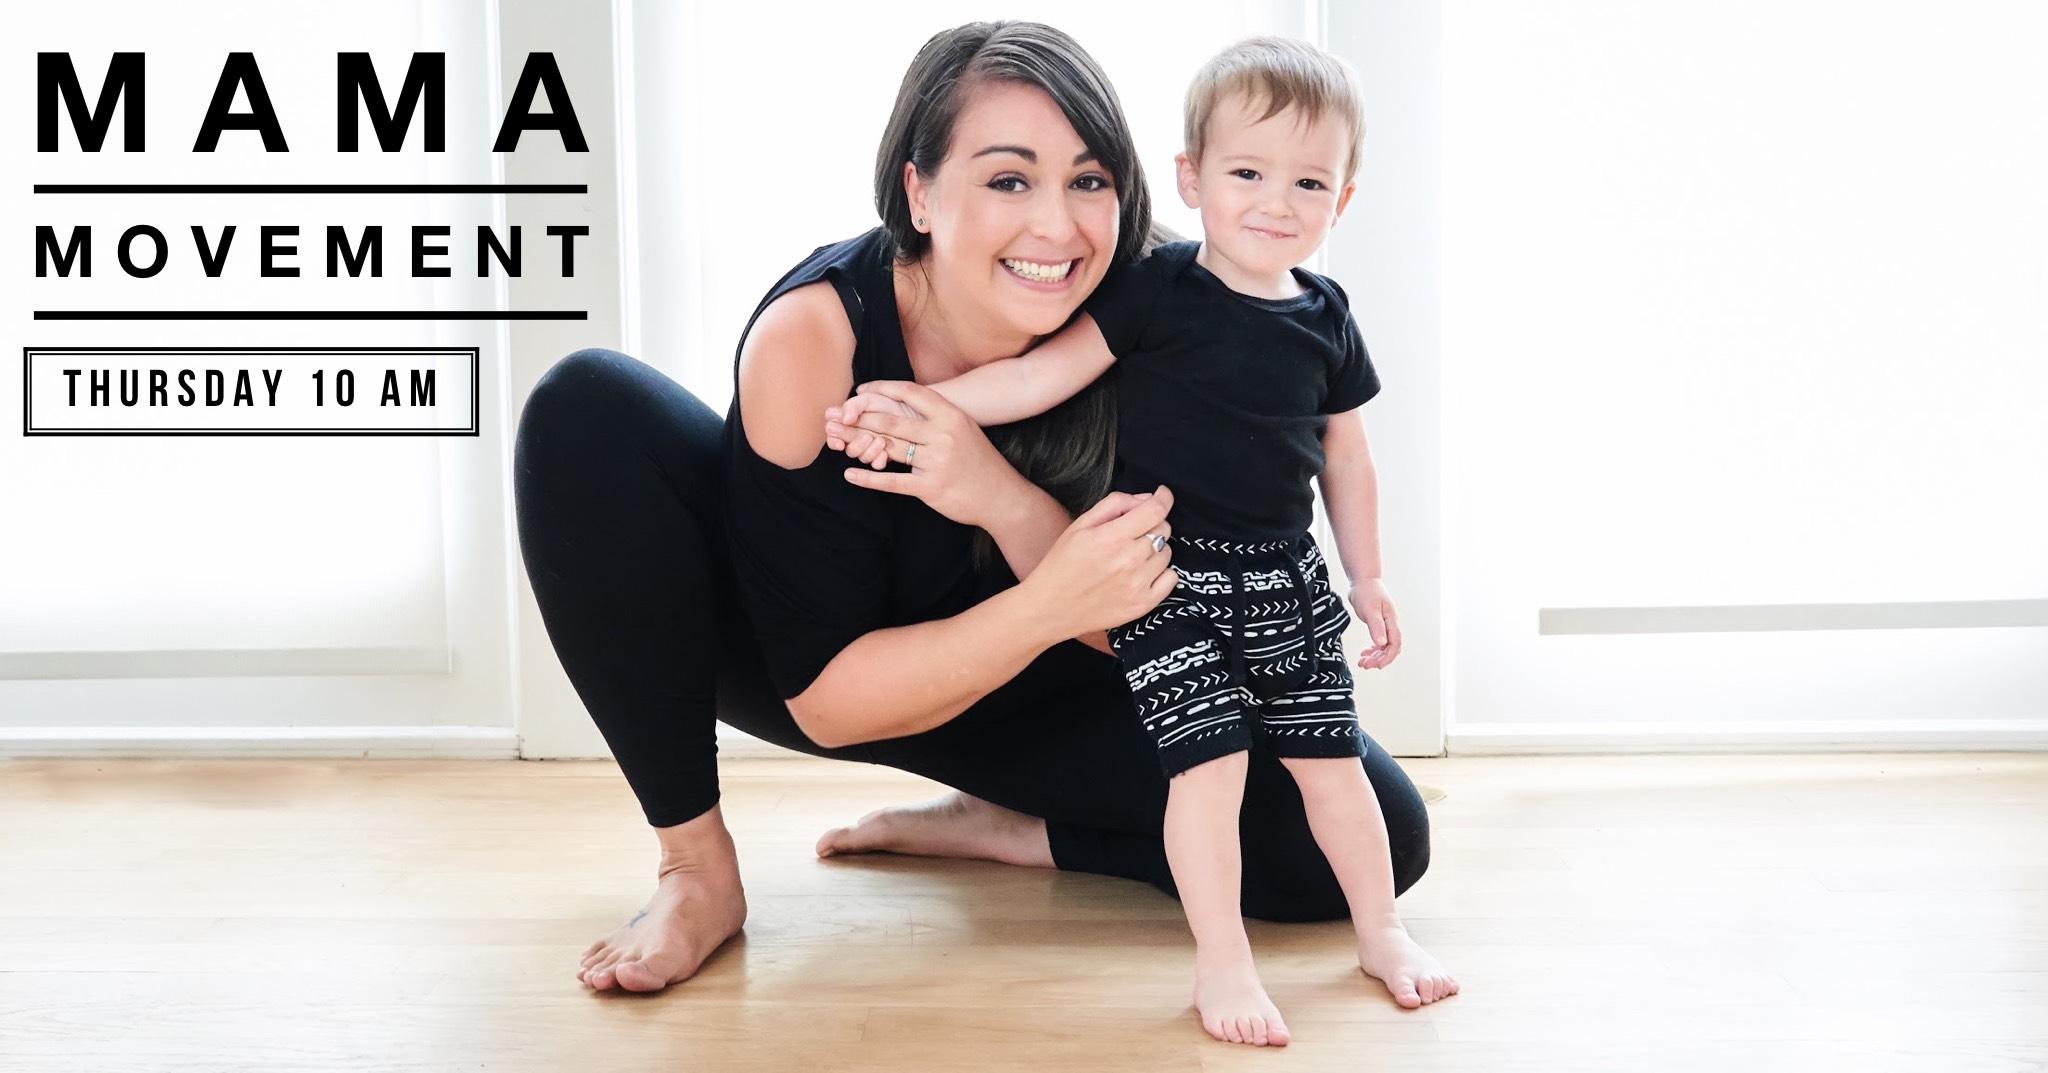 Mama Movement, Dance class designed for mother's.